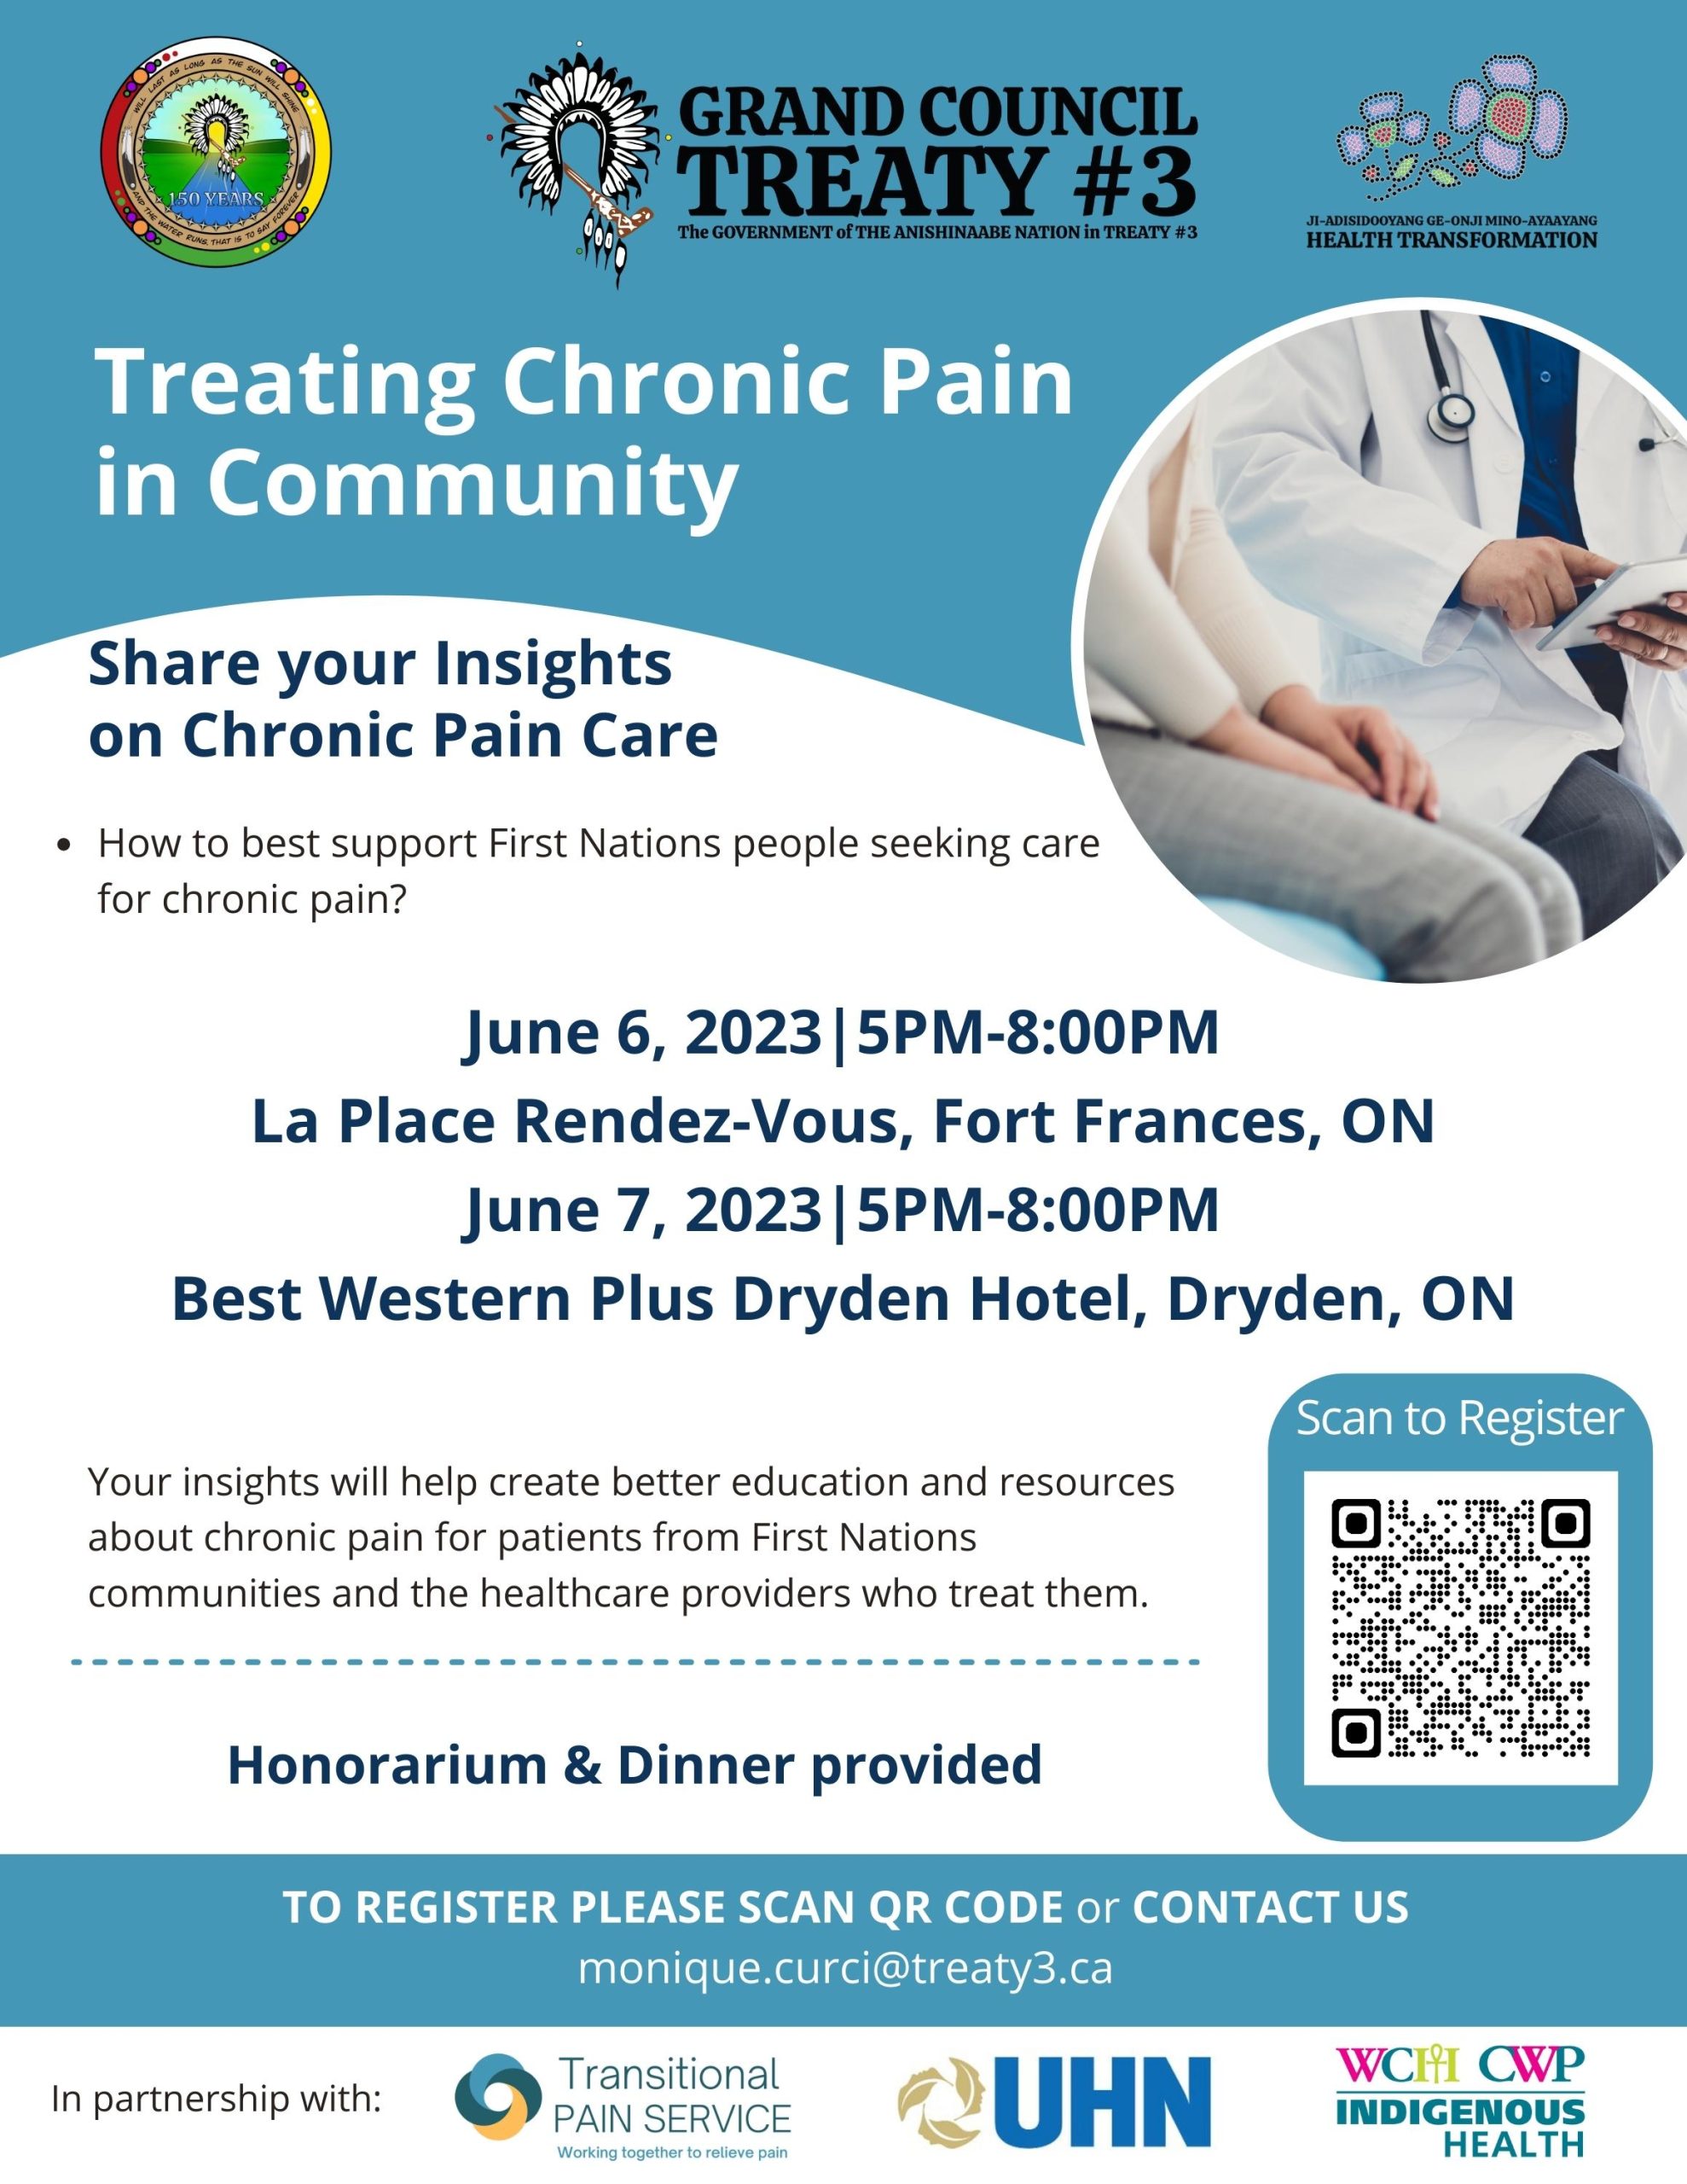 Coping Well: Chronic Pain Knowledge Gathering (Dryden)